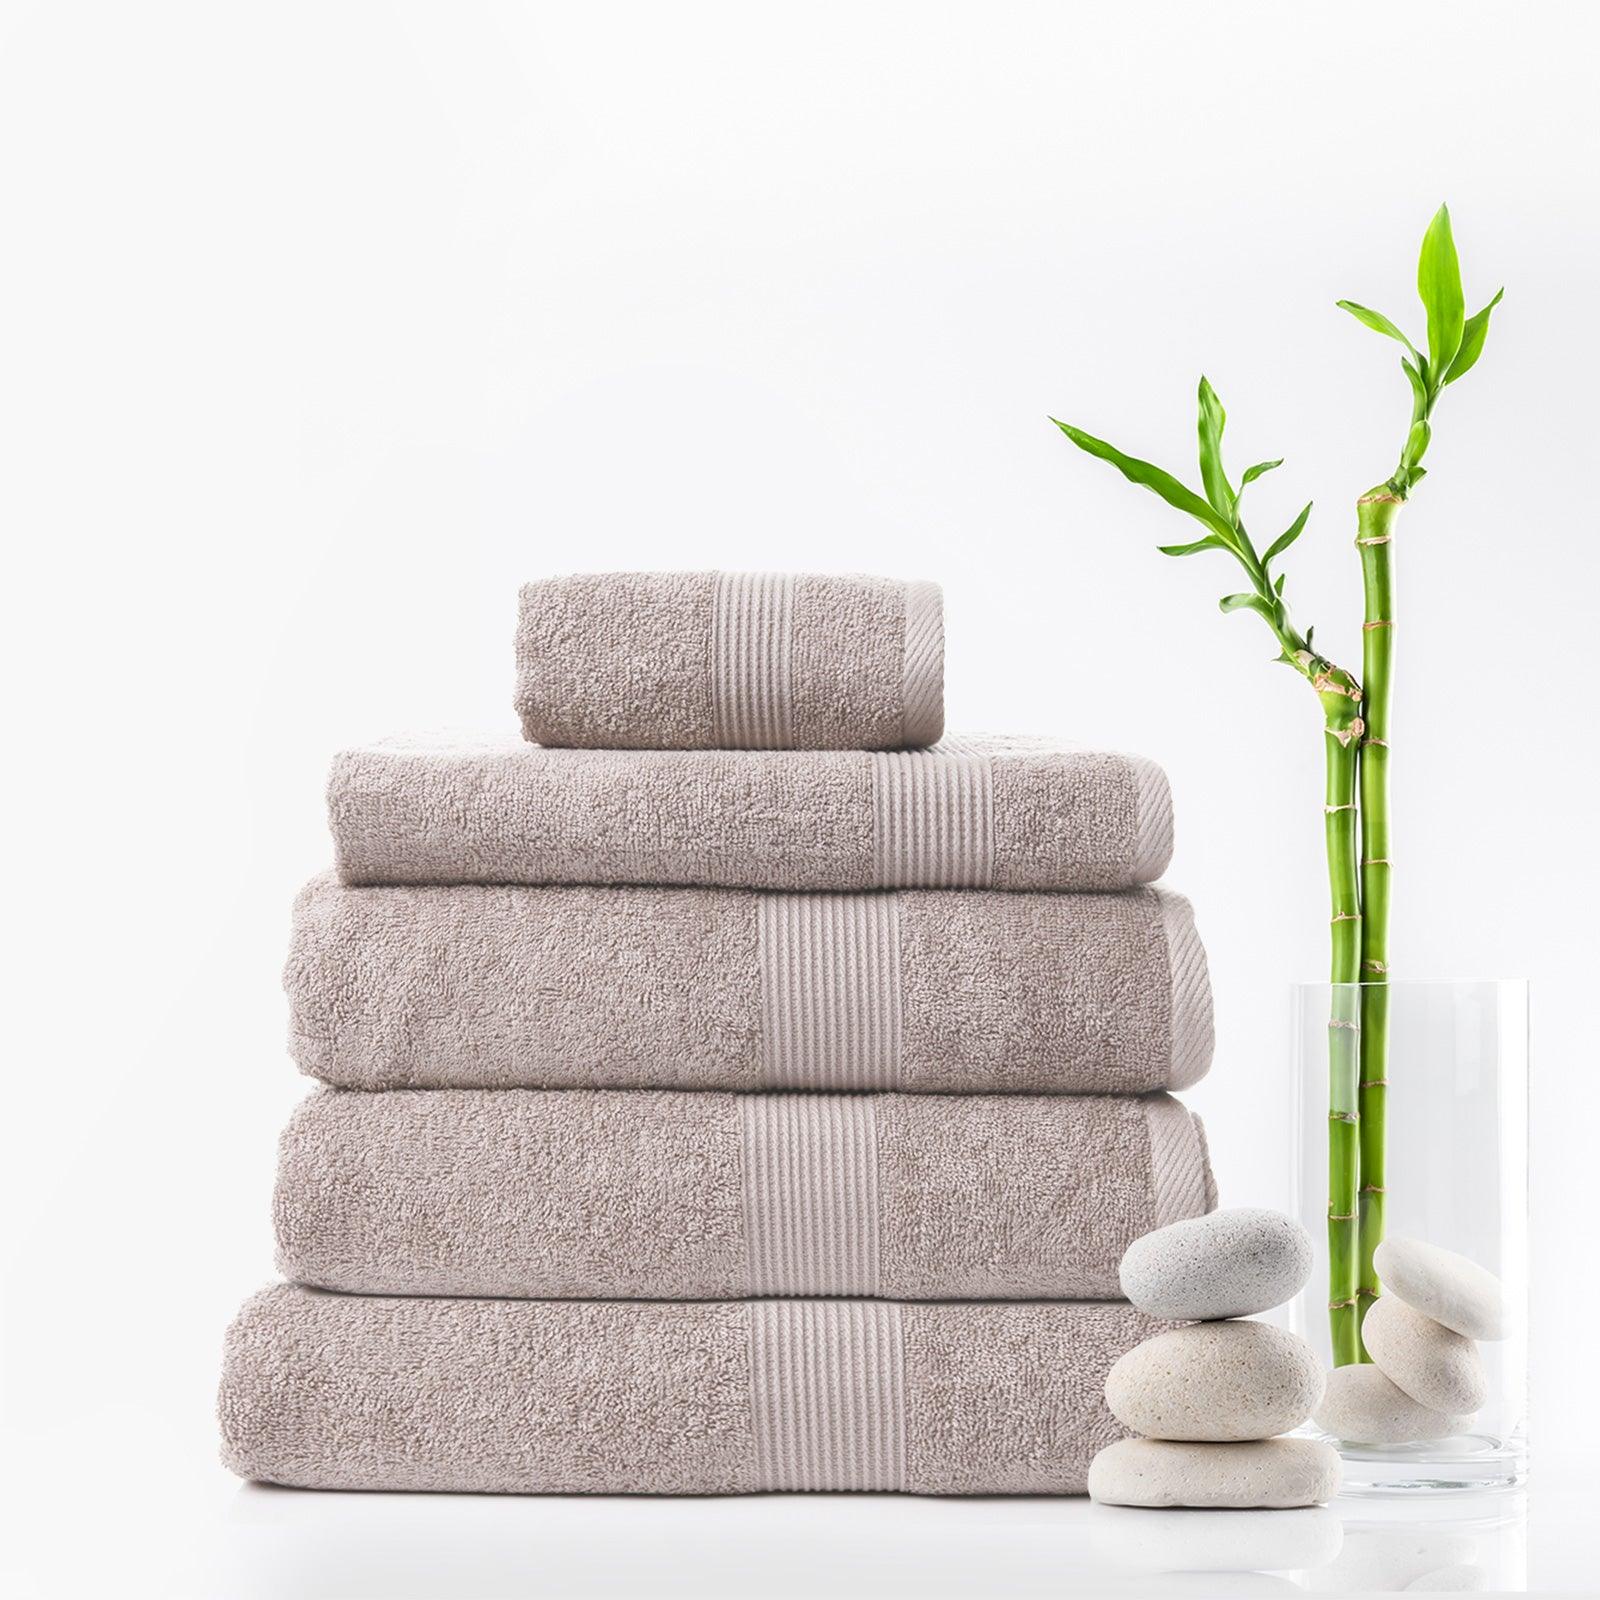 Royal Comfort 5 Piece Cotton Bamboo Towel Set 450GSM Luxurious Absorbent Plush - Champagne